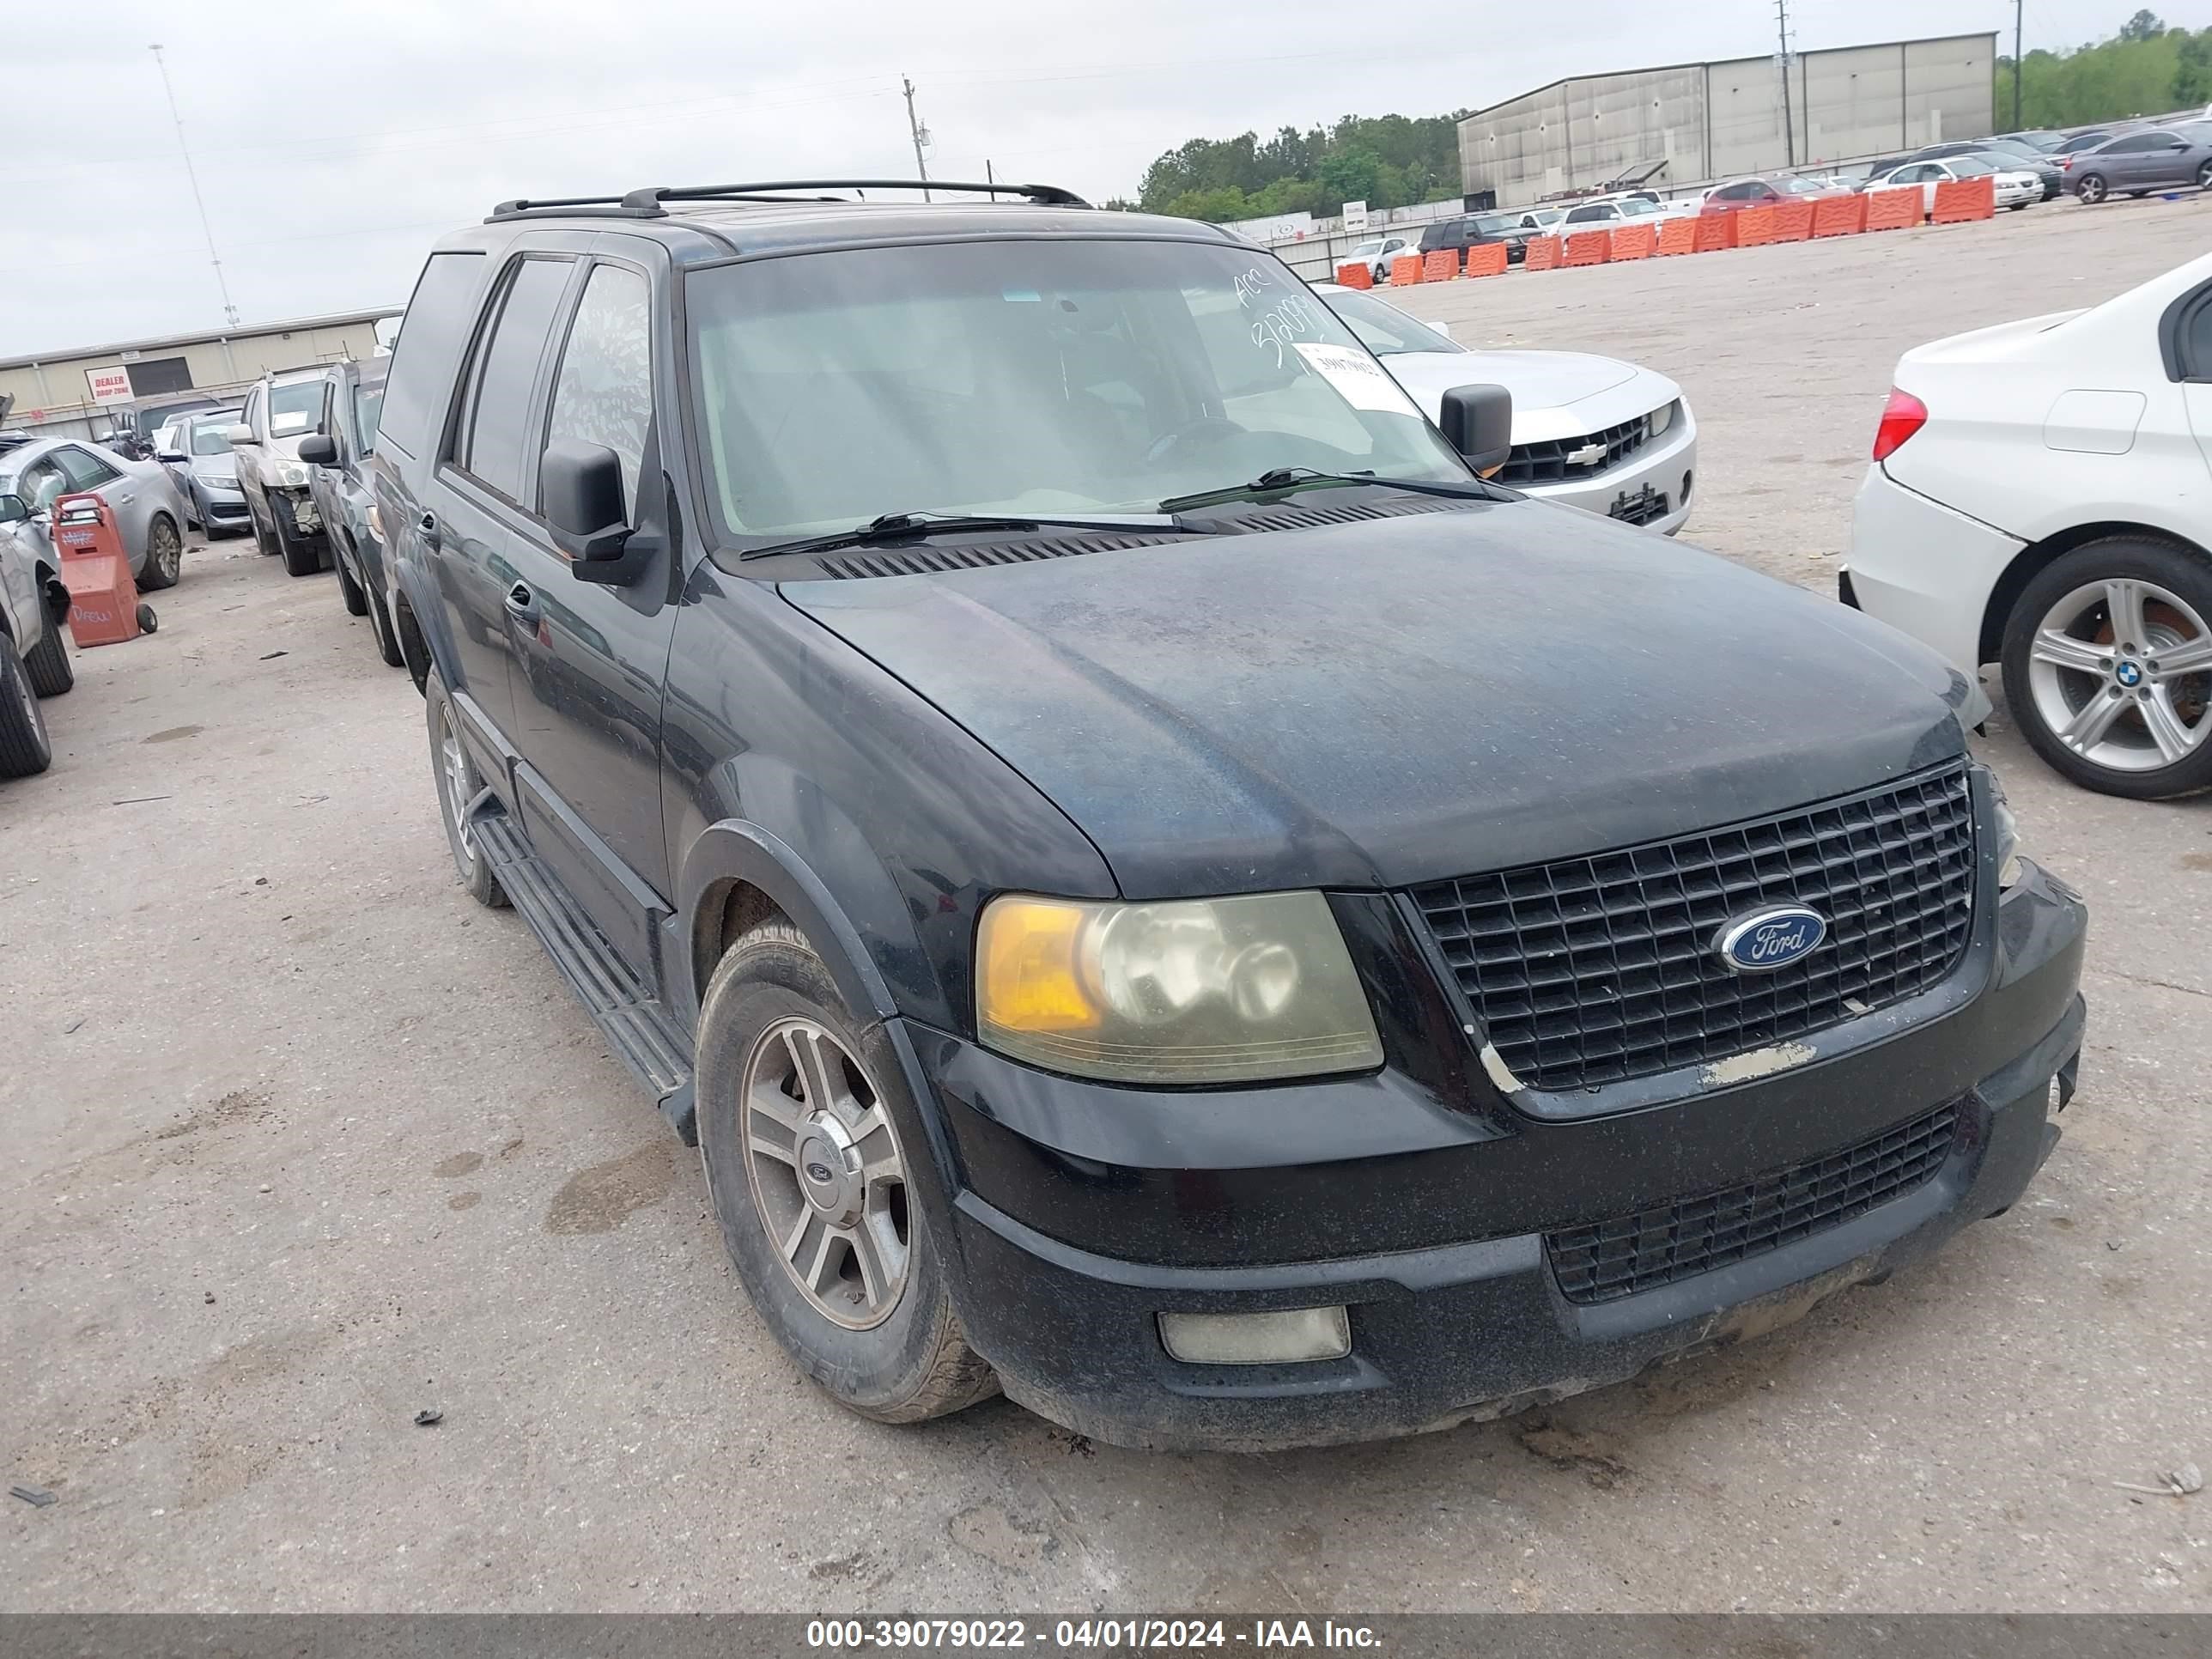 vin: 1FMFU17L14LB52759 1FMFU17L14LB52759 2004 ford expedition 5400 for Sale in 77038, 2535 West Mt. Houston Road, Houston, Texas, USA